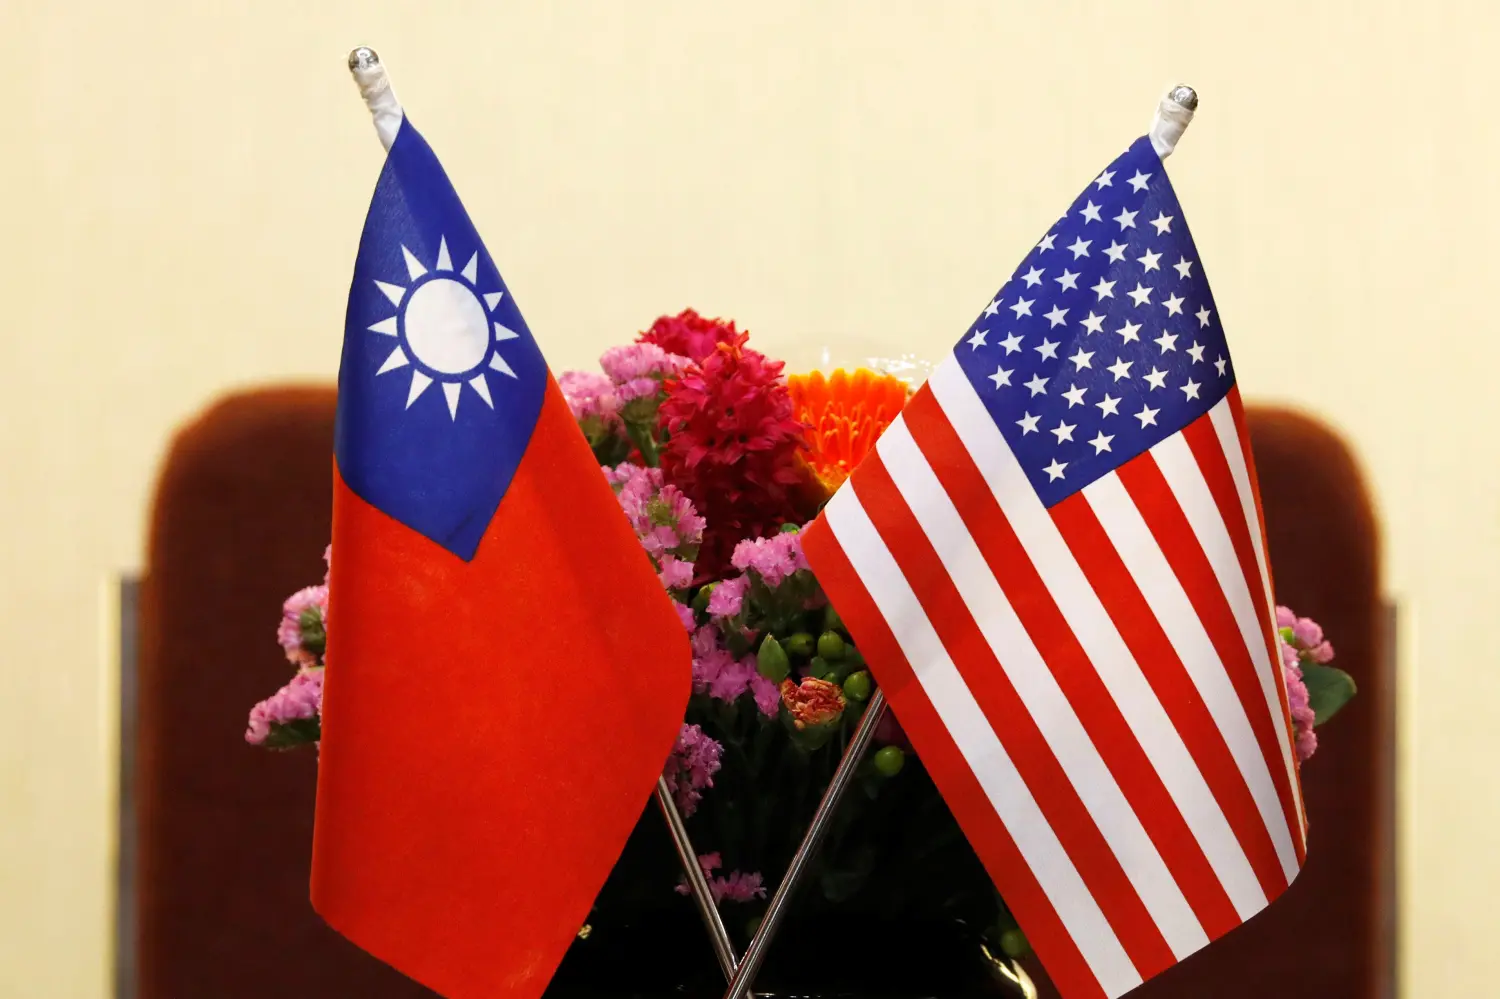 Taiwan's foreign ministry maintains confidence in enduring bipartisan U.S. support (Credits: Brookings Institution)